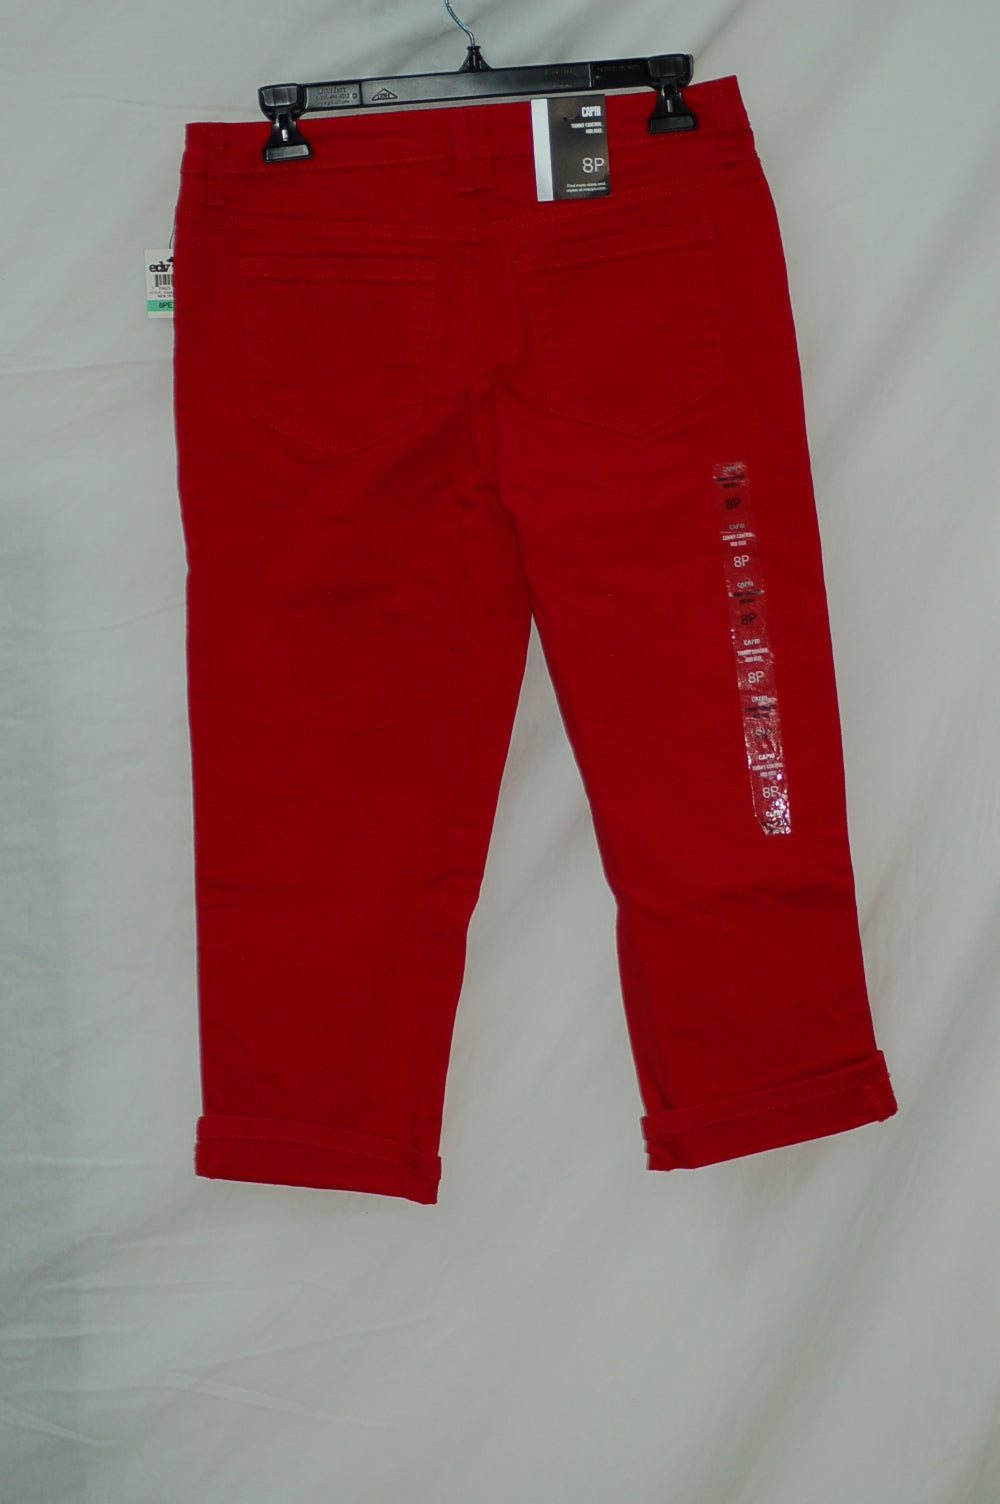 Style Co Petite Tummy Control Capris New Red Amore 8P